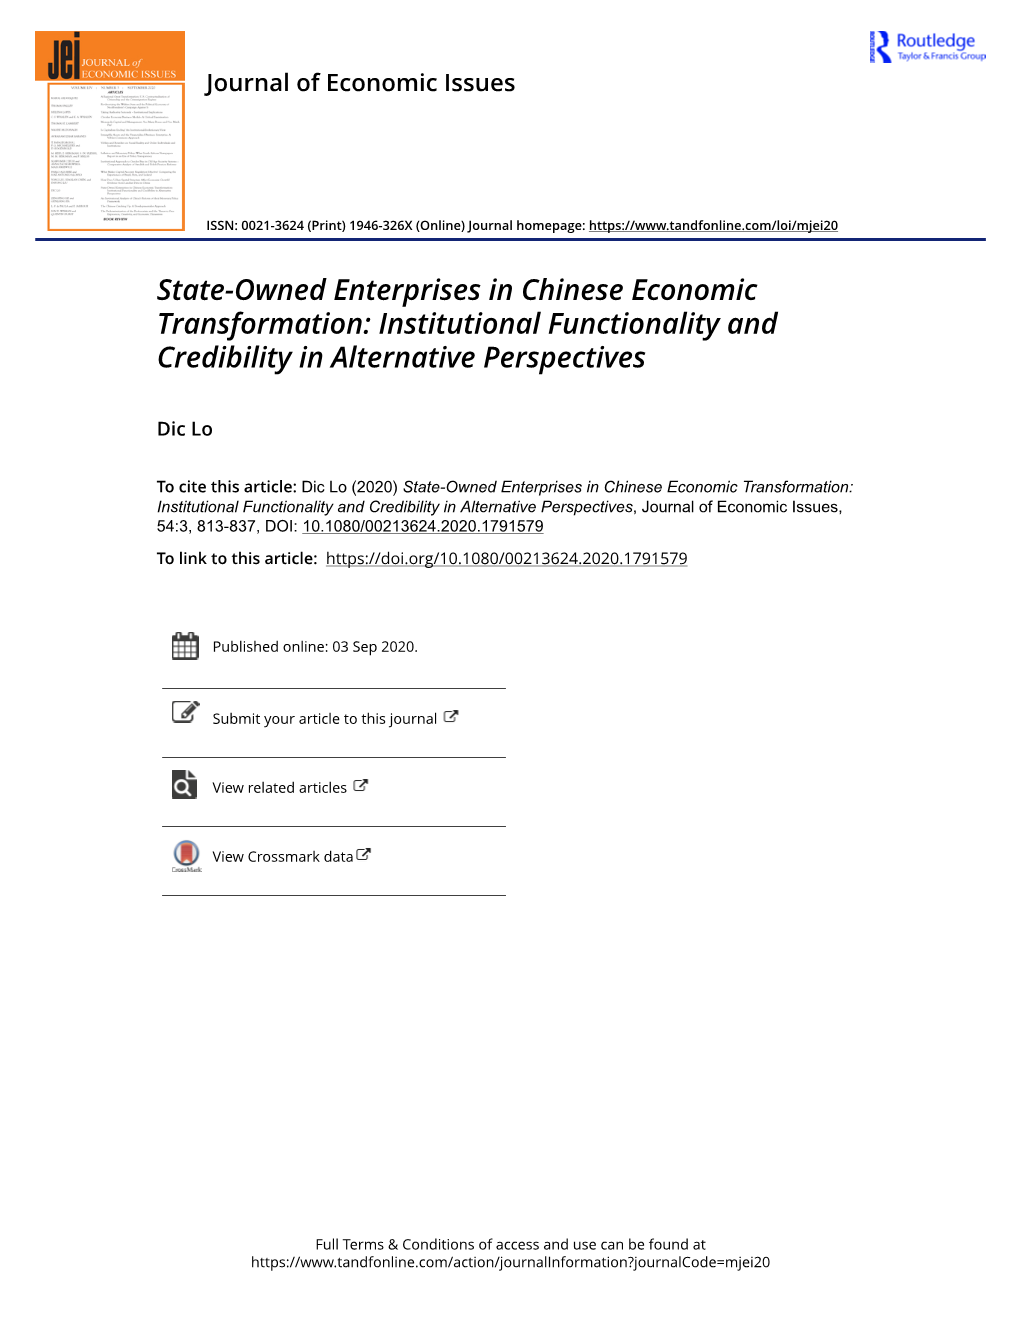 State-Owned Enterprises in Chinese Economic Transformation: Institutional Functionality and Credibility in Alternative Perspectives